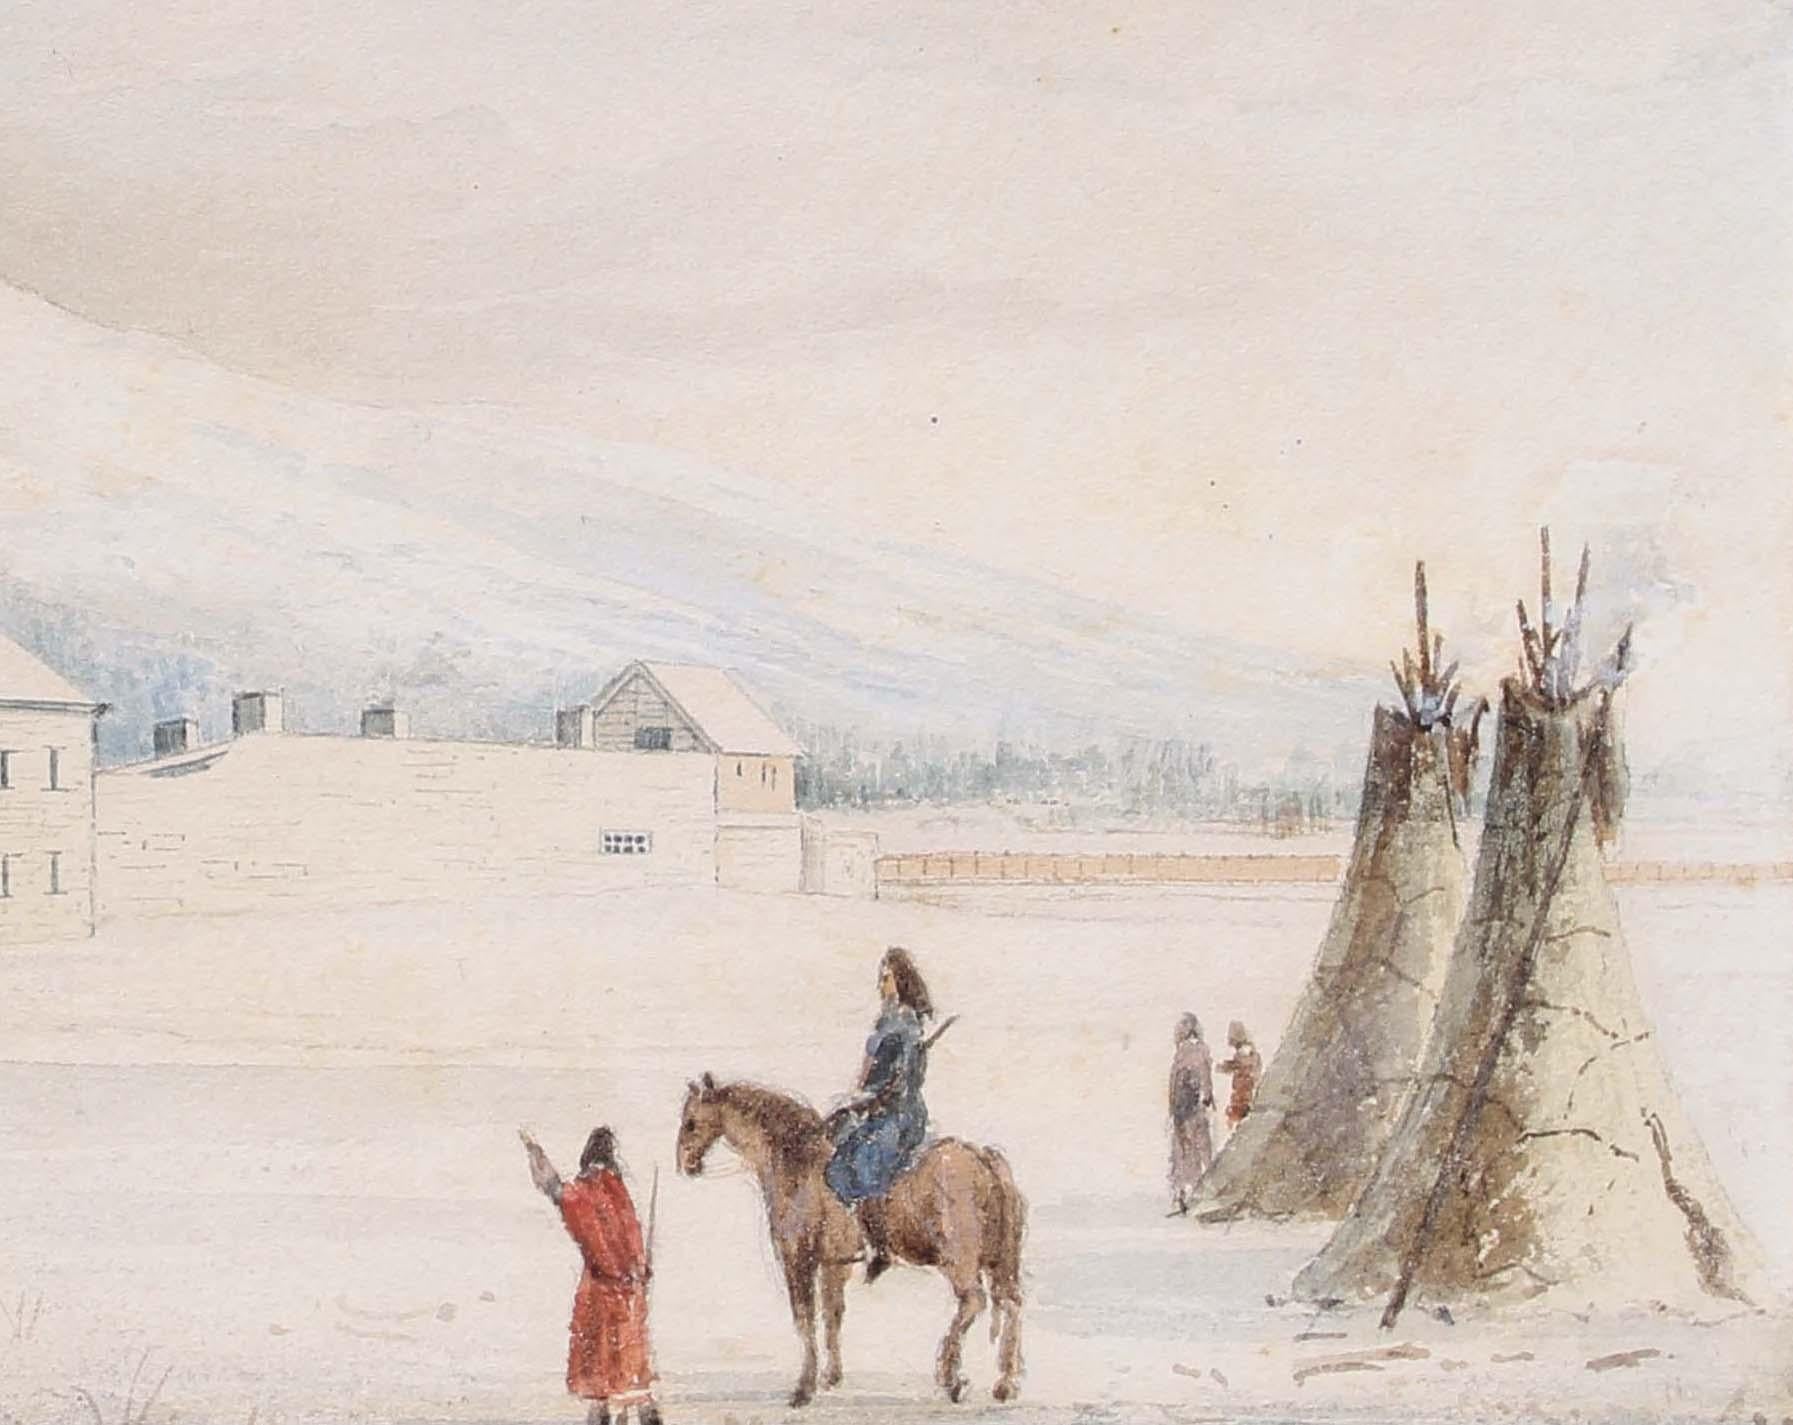 A rare mid 19th Century watercolor depicting Native Americans approaching a fort.  

The subjects appear to be from a Northern Plains Tribes, and arre approaching a palisades style fort.  

This work has been dated by experts to the mid 19th